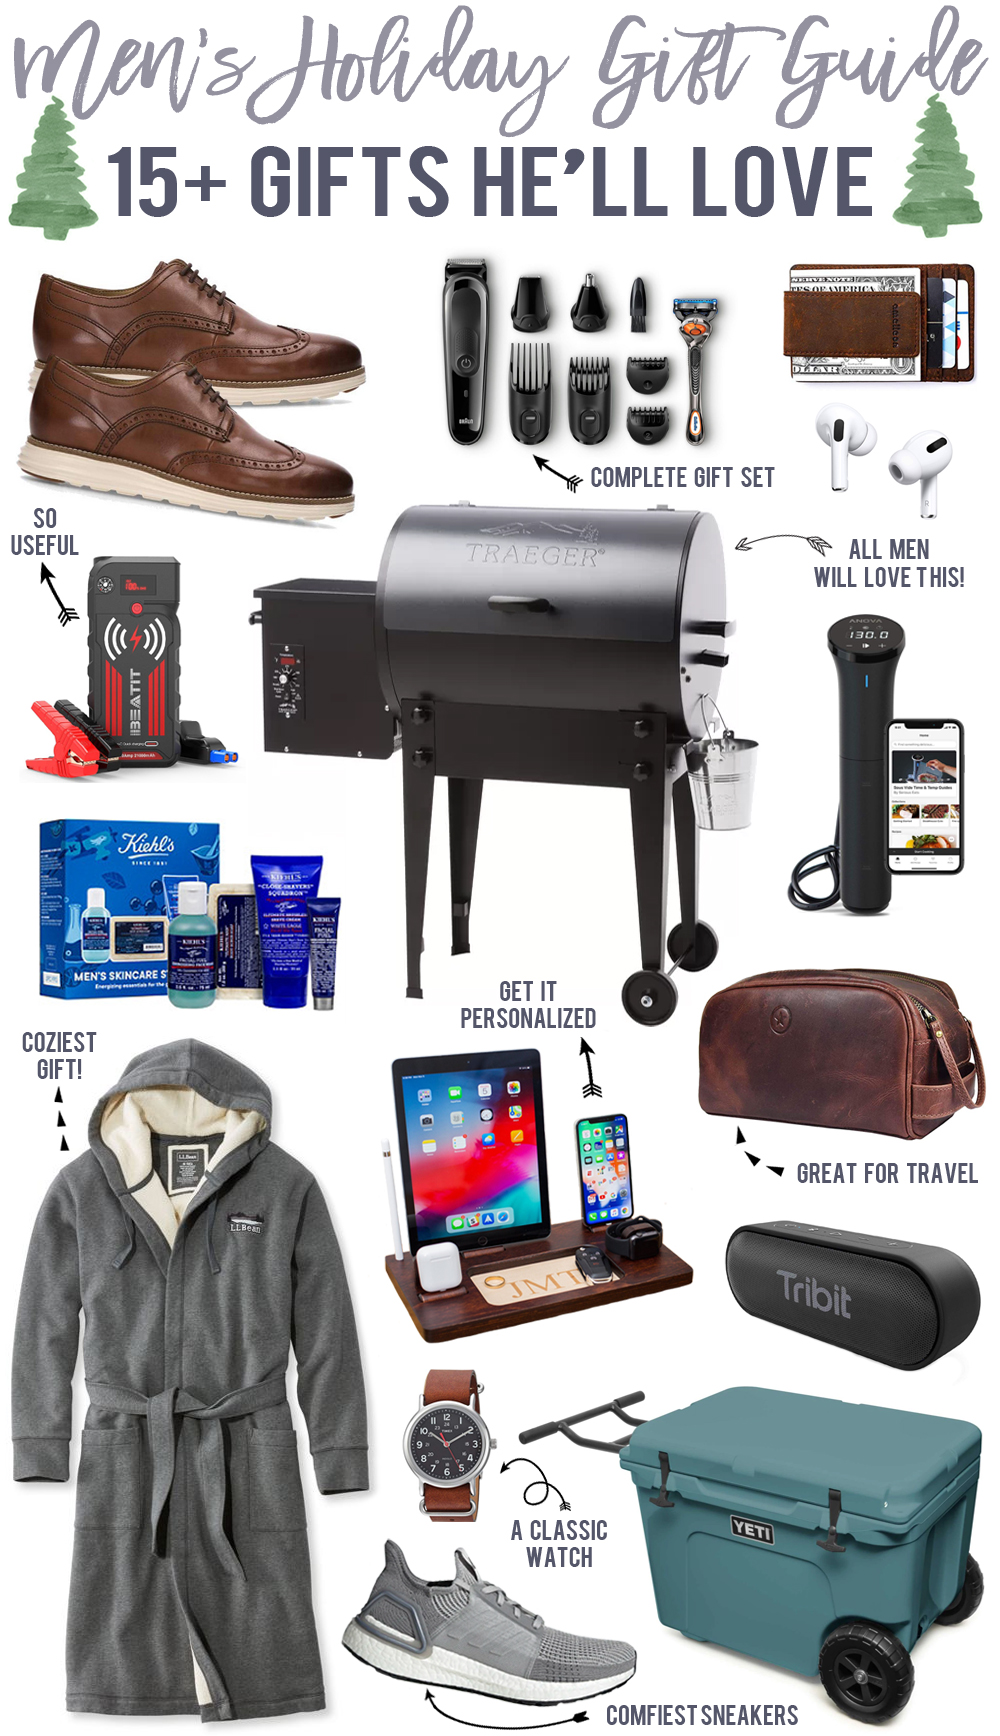 Men's Holiday Gift Guide: 15+ Gifts He